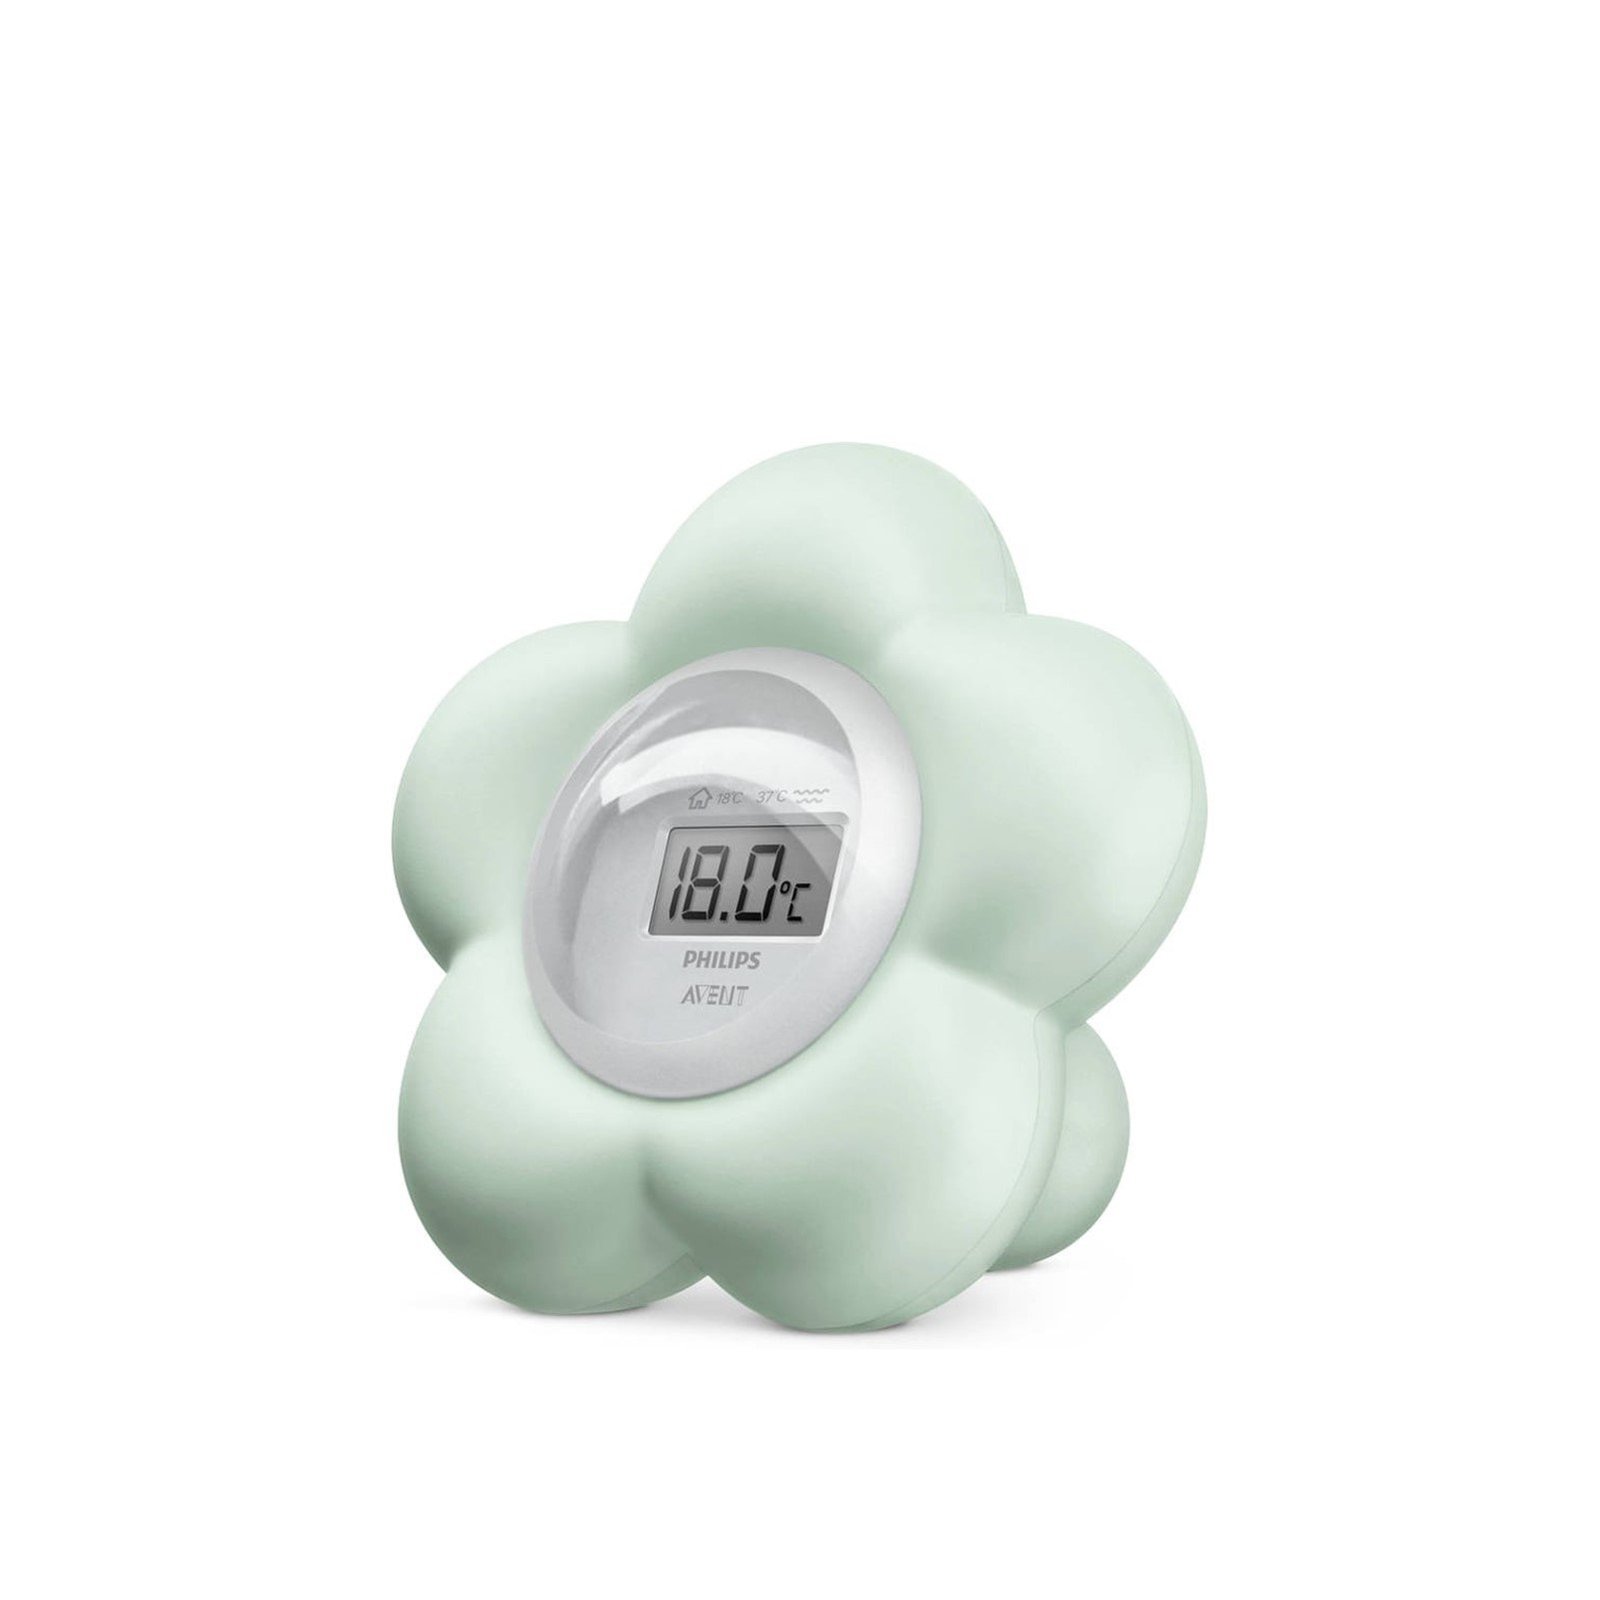 Philips Avent Digital Bath And Bedroom Thermometer Mint